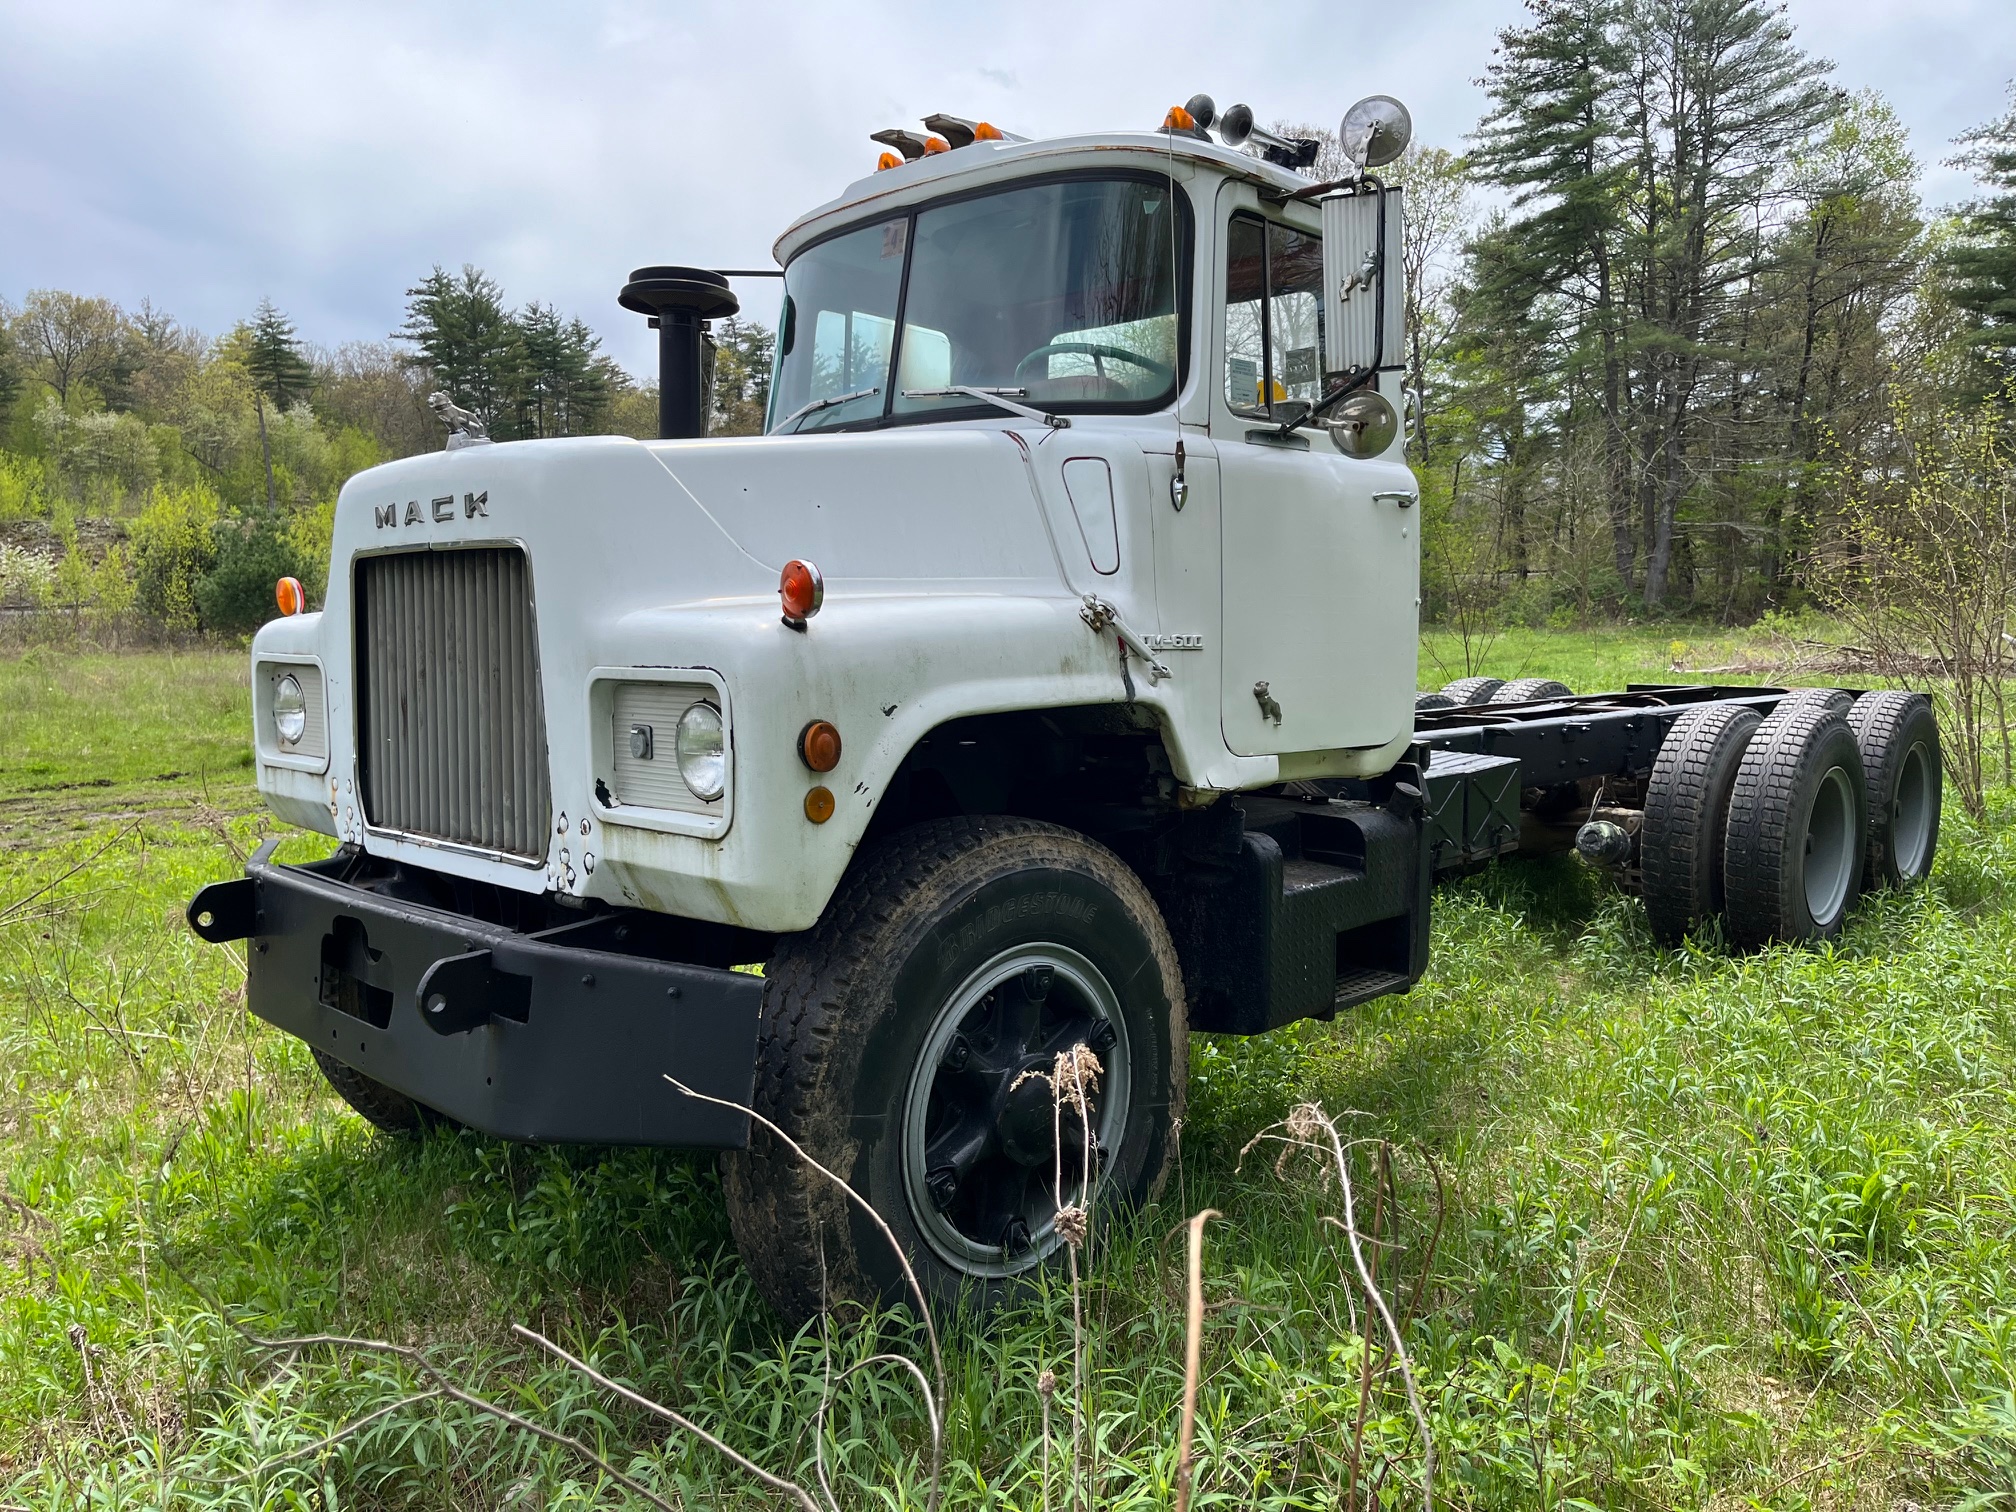 Mack DM600 Cab & Chassis. Double frame. 673 - 6 cylinder diesel engine with turbo and 214,430 miles. Two stick 5 + 4 Transmission with 52K lbs. rears. Good tires all around. Air ride driver seat, air brakes and differential lock. Frame measurement from back of cab to end of frame is 21.4 ft. in.